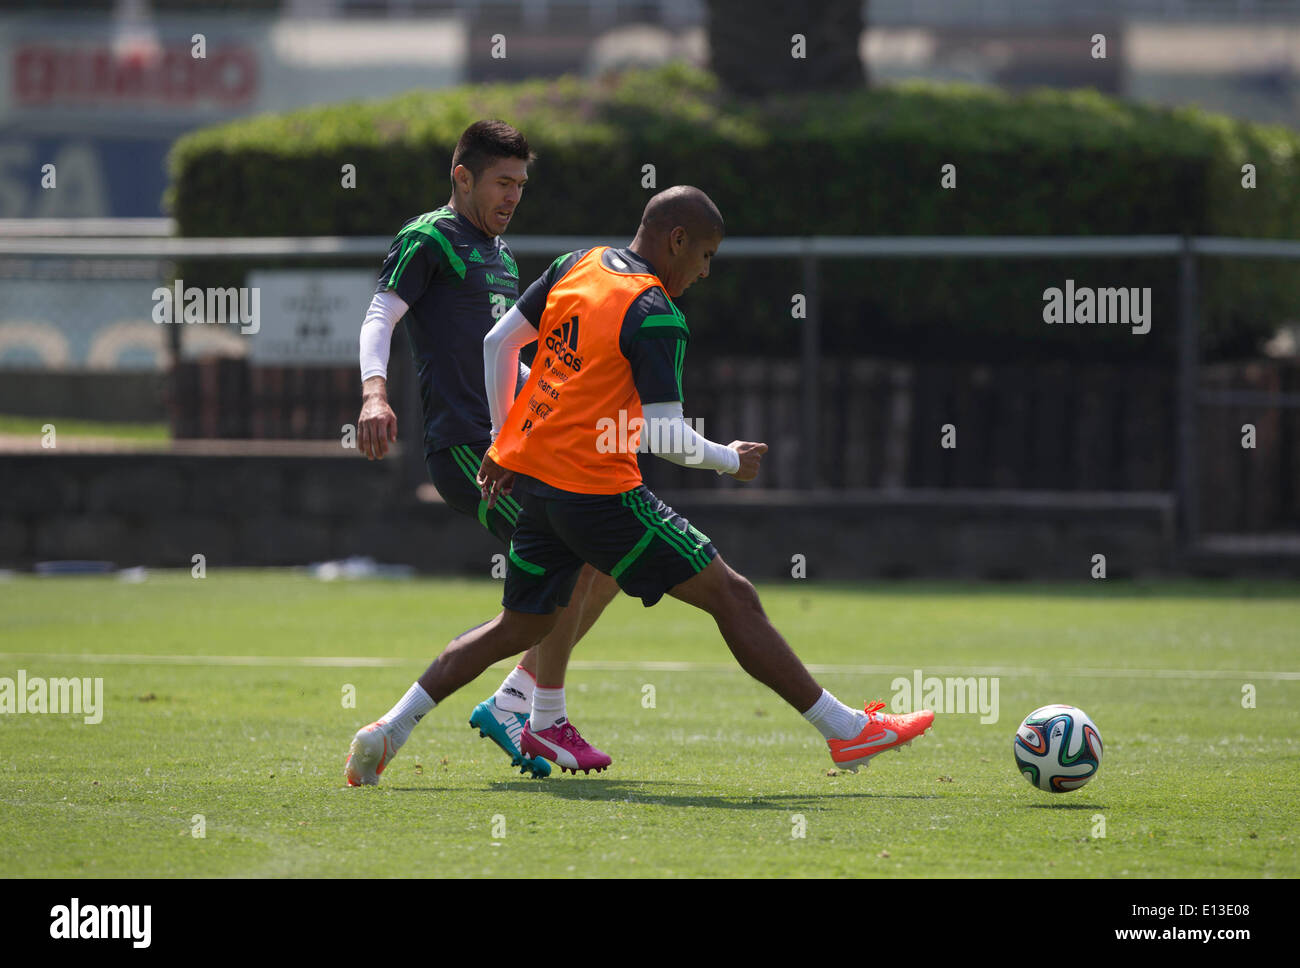 Mexico City. 21st May, 2014. Mexican National Team players Oribe Peralta (L) and Carlos Salcido take part in a training session at the High Performance Center of the Mexican Soccer Federation in Mexico City, on May 21, 2014. Mexico will have a friendly match with Israel on May 28 before the FIFA World Cup. © Sandra Perdomo/Xinhua/Alamy Live News Stock Photo